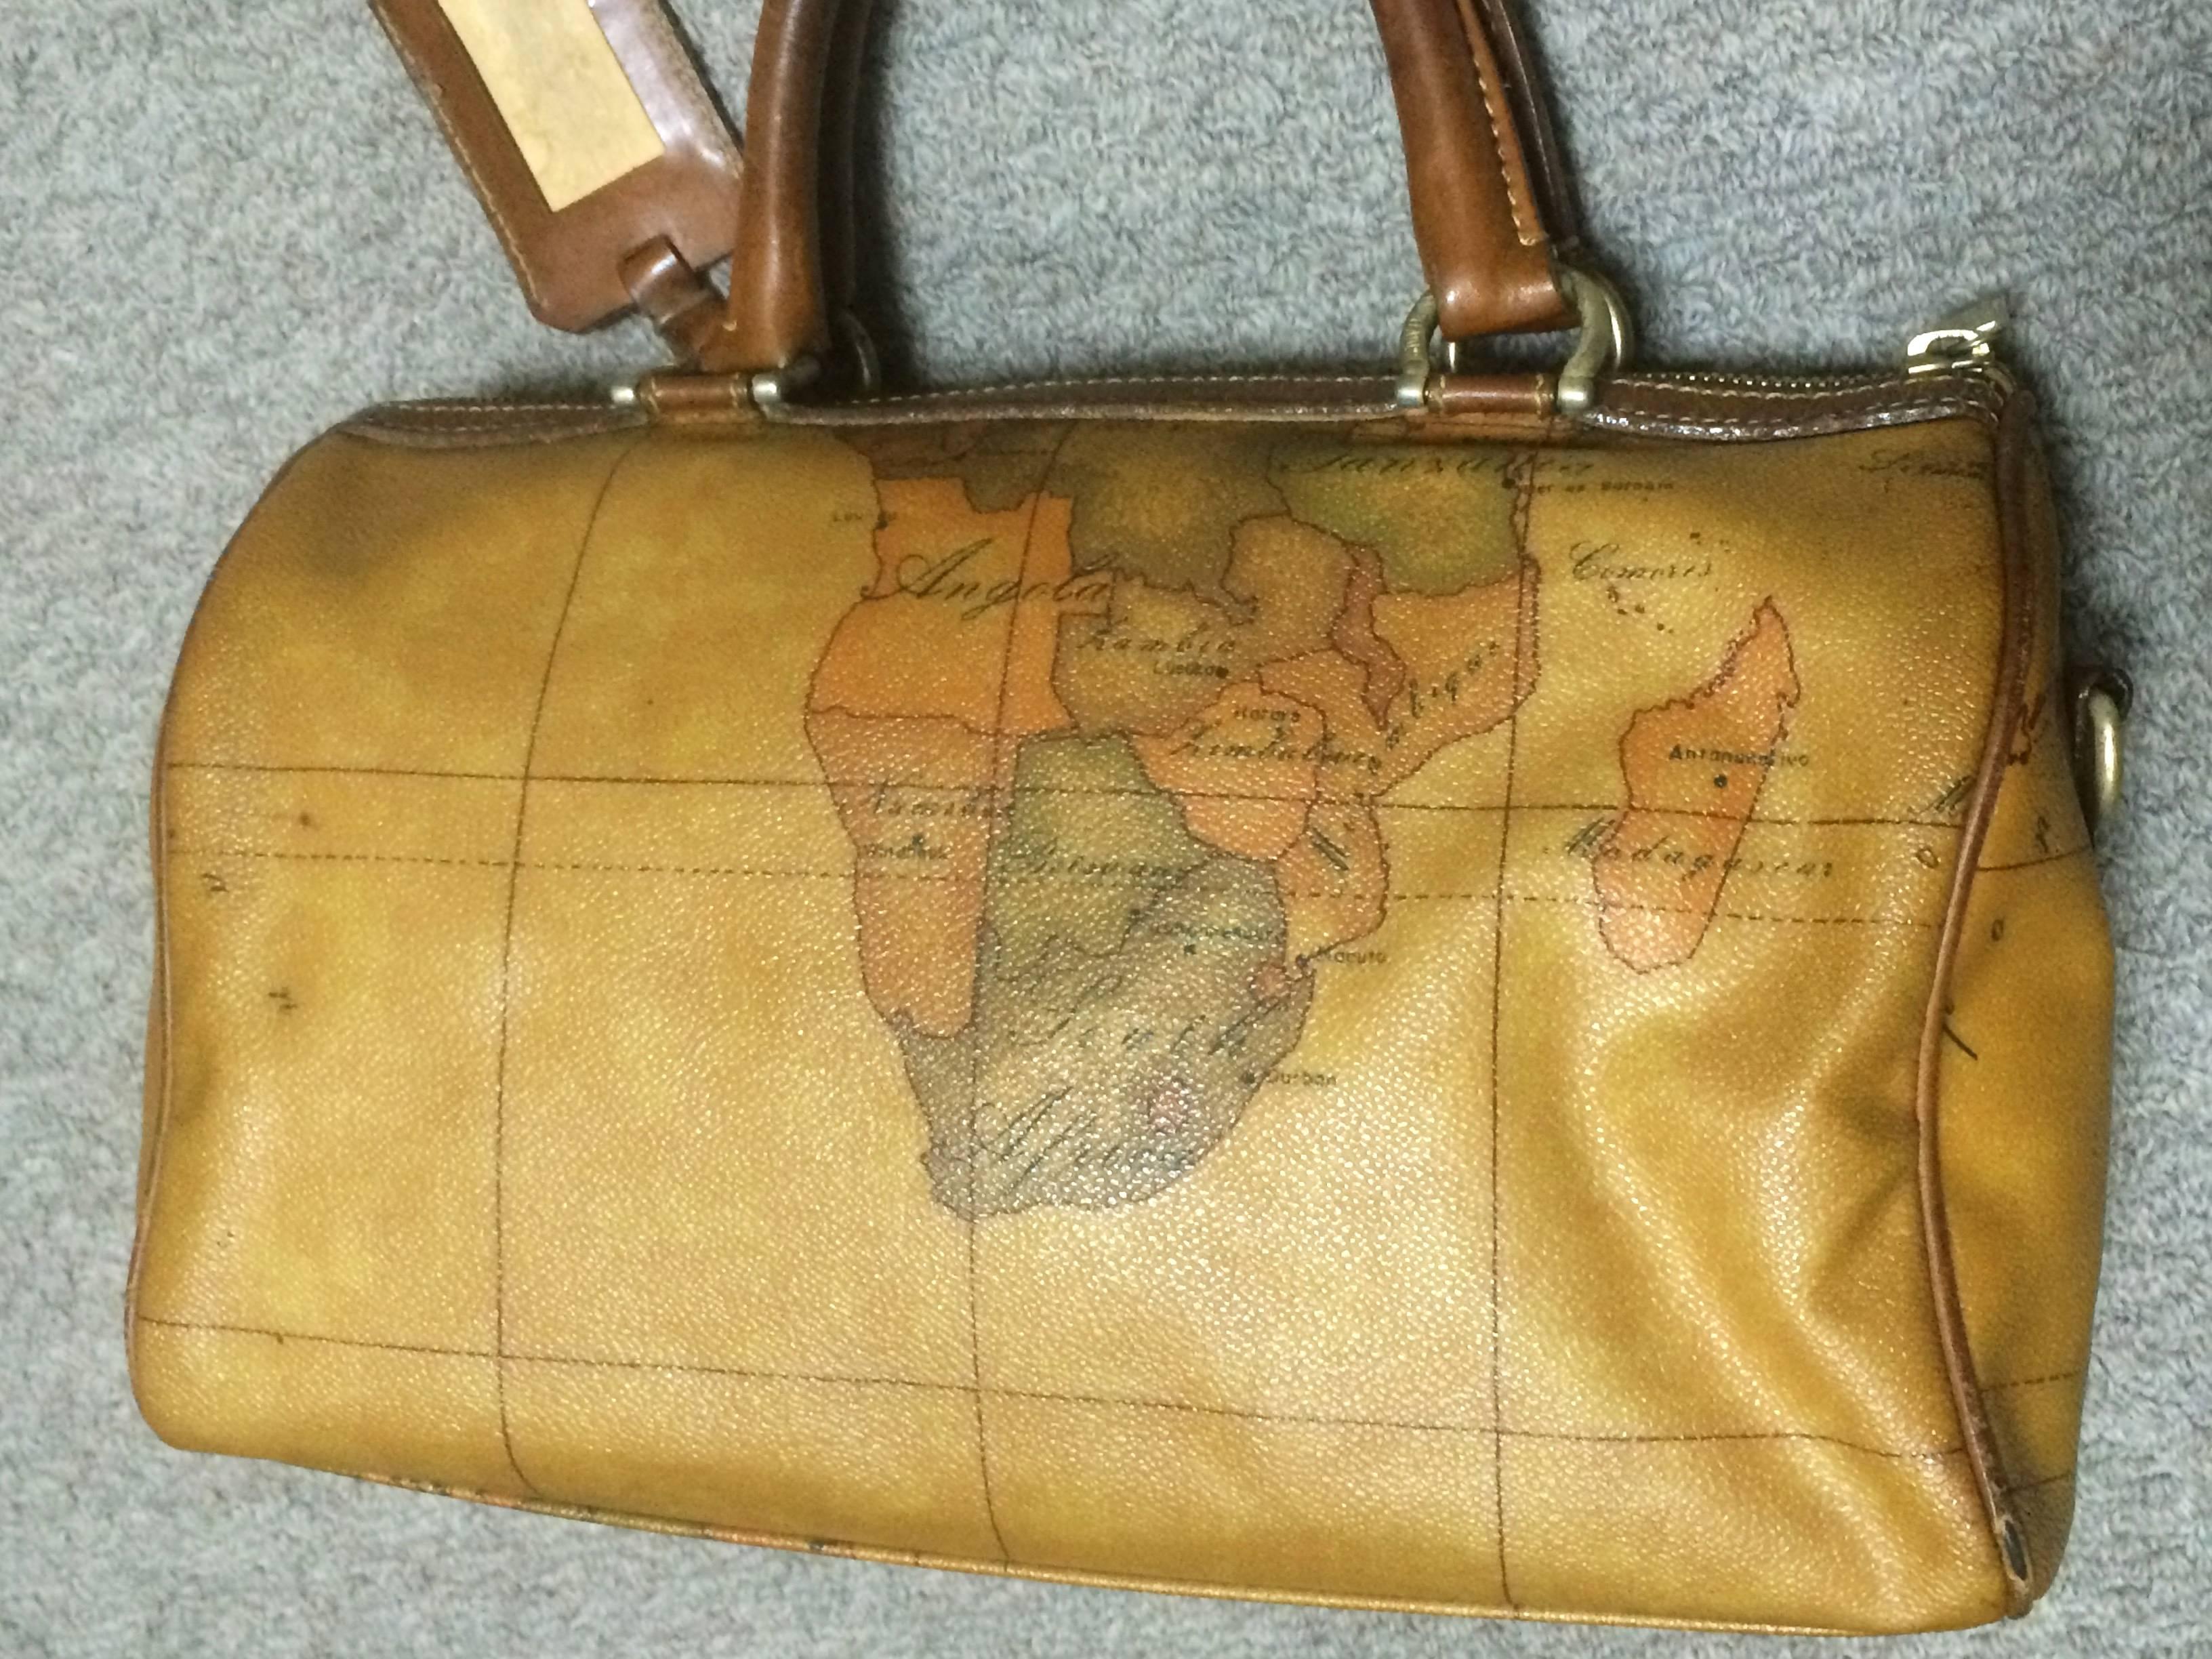 1990s. Vintage Alviero Martini Prima Classe speedy type duffle bag, USA, Mexico, Caribbean and Africa map focused.

You will absolutely love it! The purse is all about USA, Mexico, Caribbean, and Africa focused. 
The purse would fit any outfits